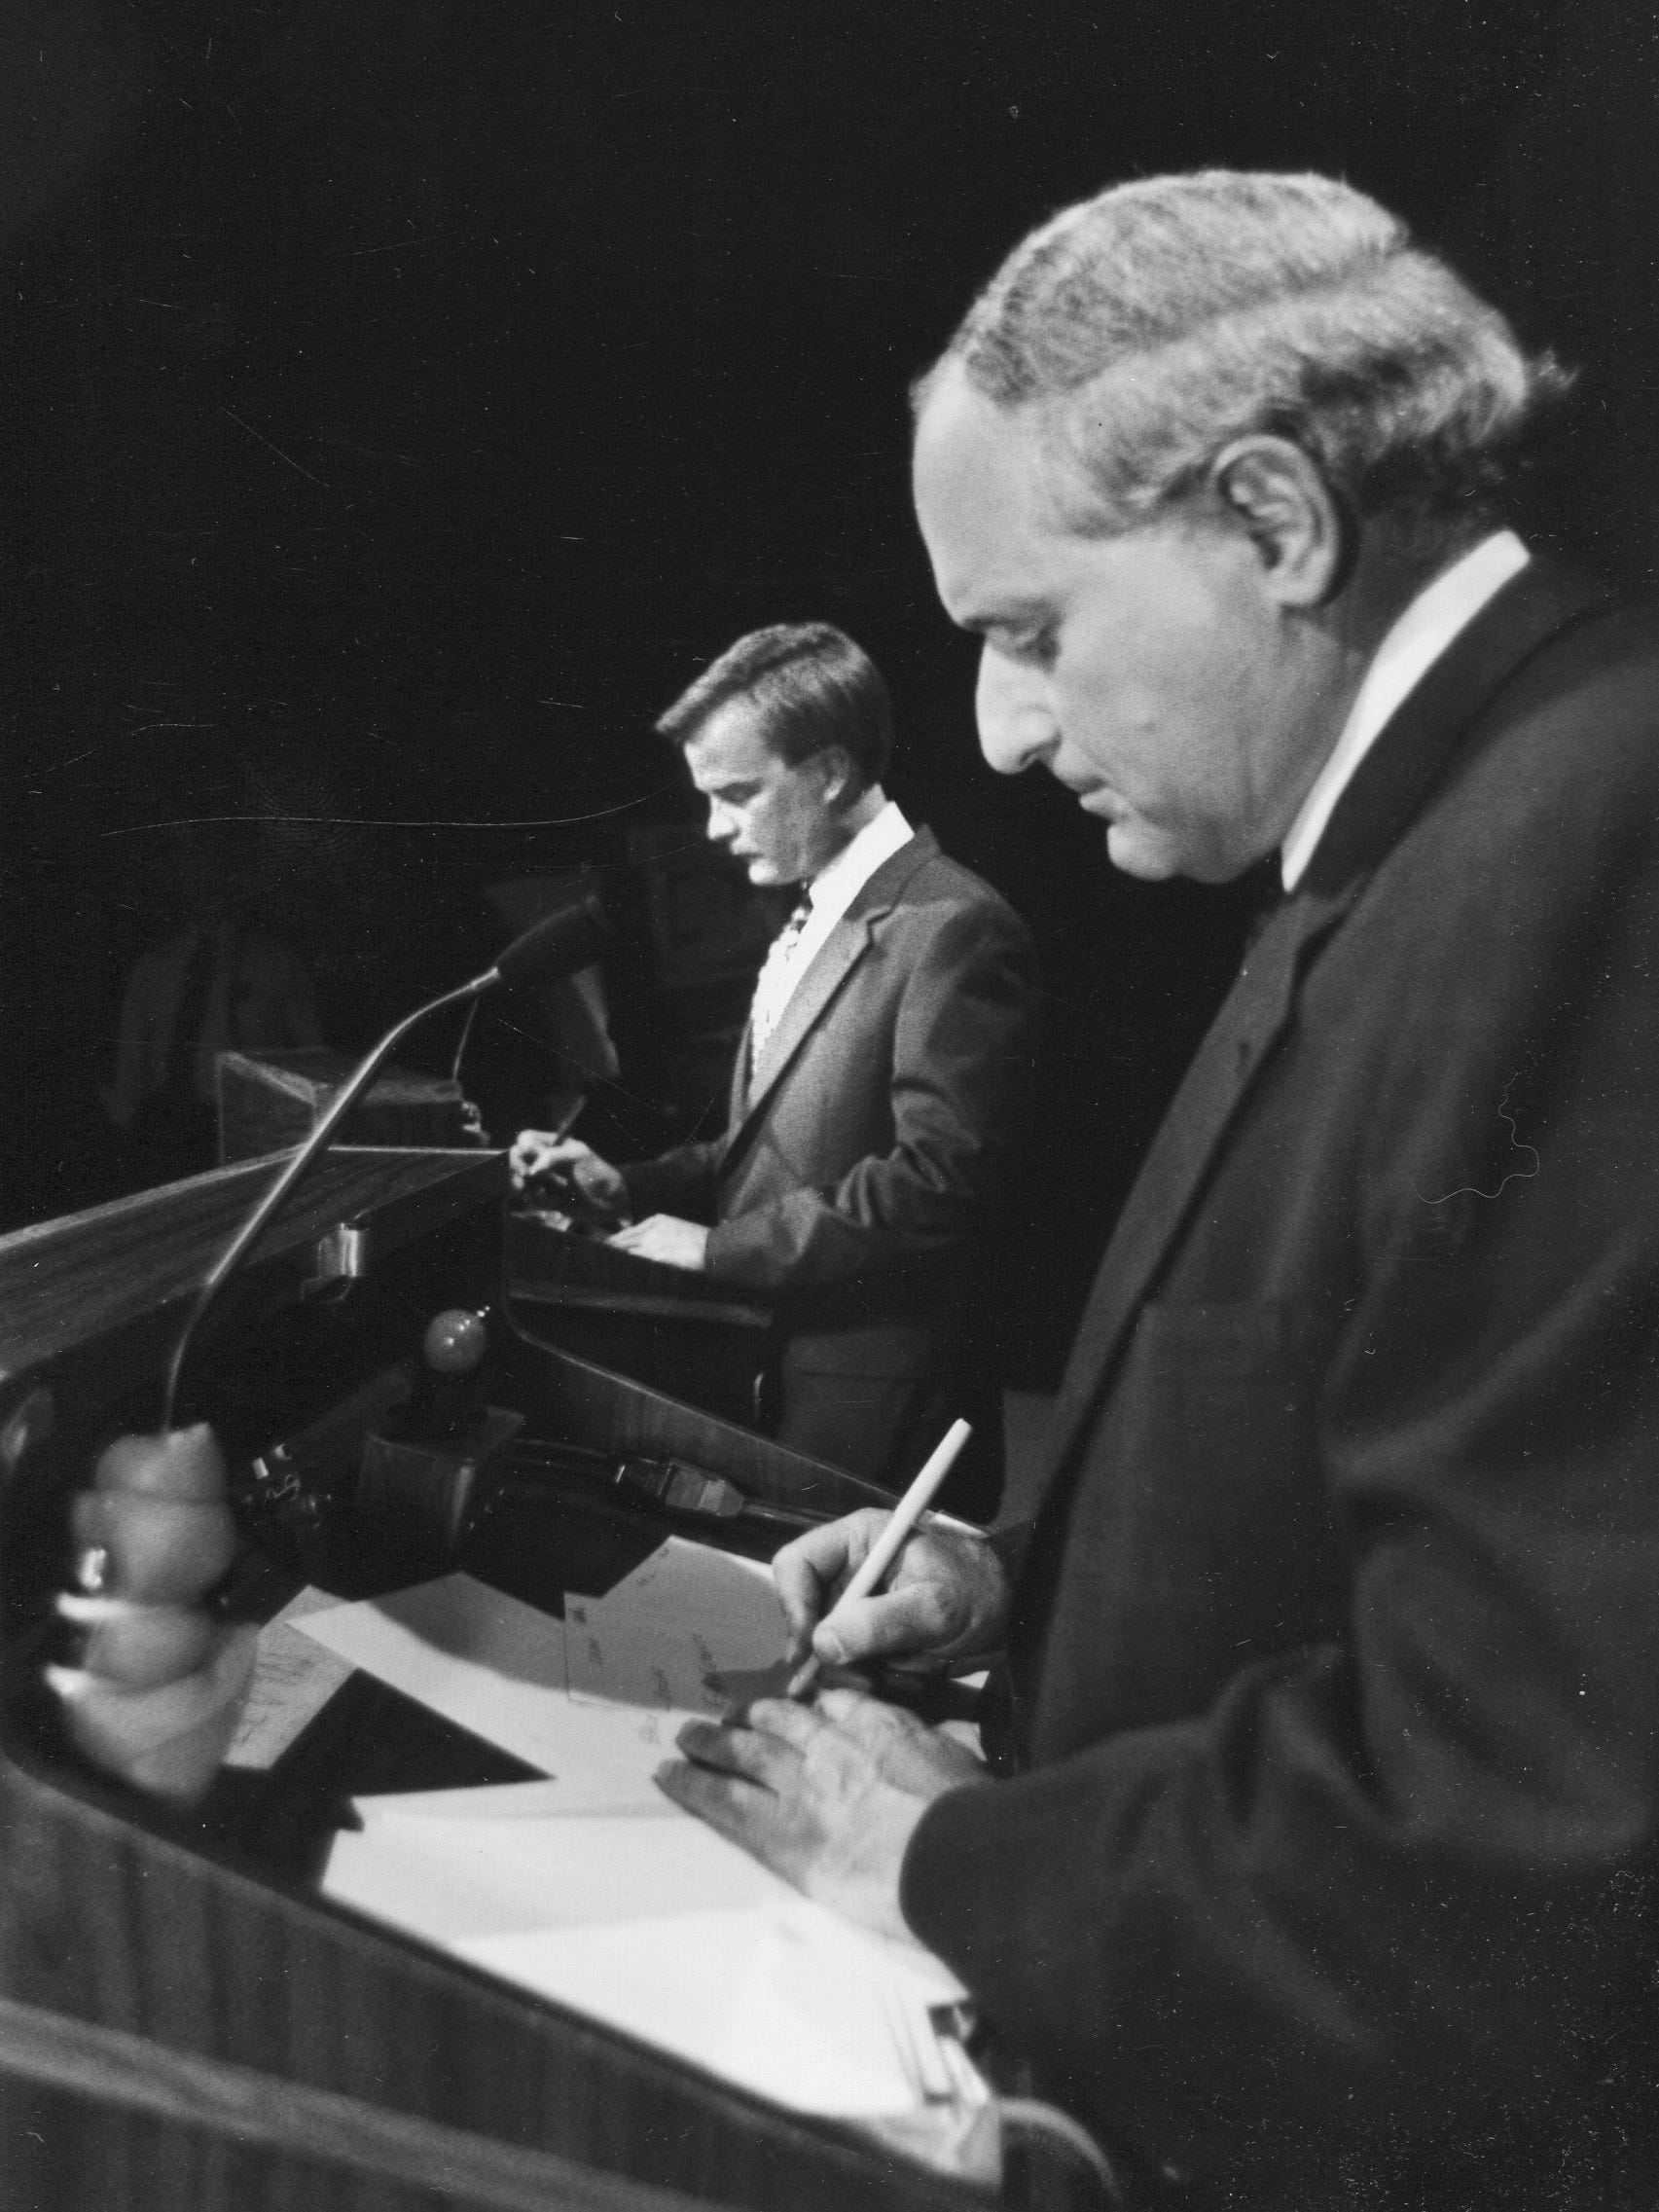 Sen. Carl Levin debates GOP challenger U.S. Rep. Bill Schuette in 1990, the last year he faced a significant election challenge.